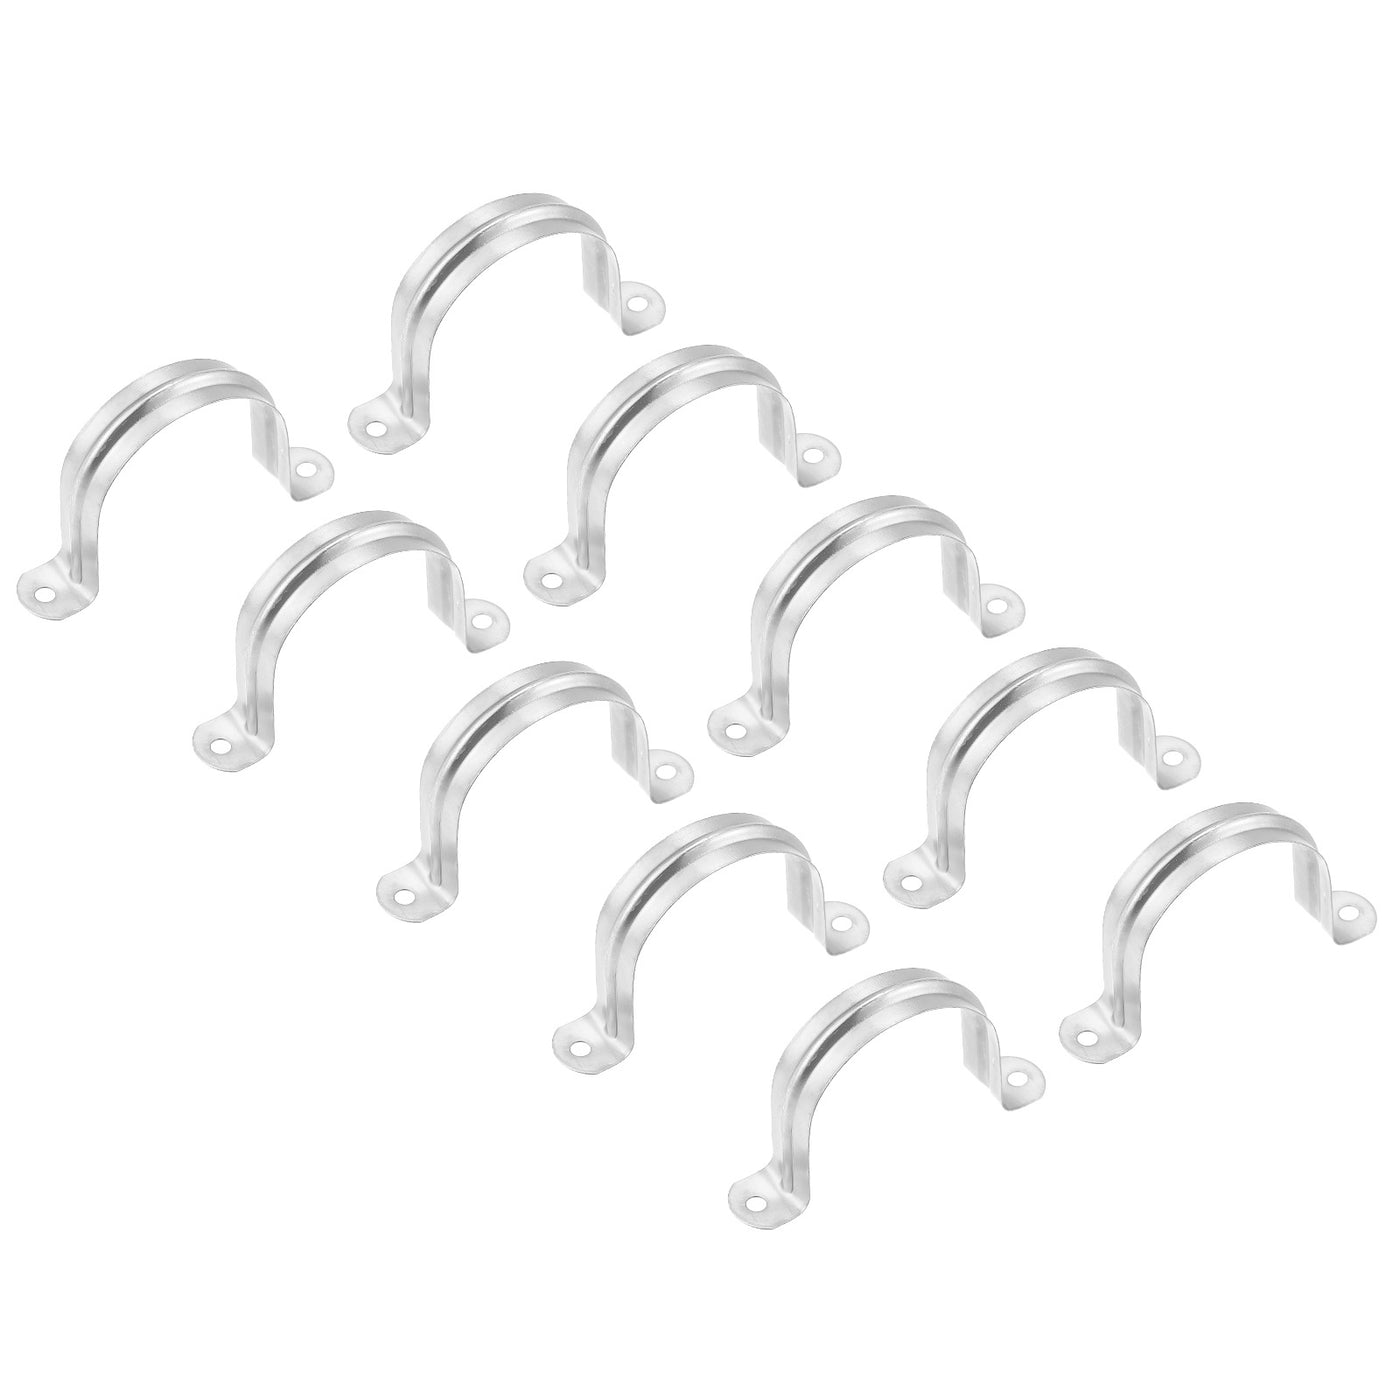 uxcell Uxcell Rigid Pipe Strap 16pcs 4 5/16" (110mm) Carbon Steel U Bracket Tension Tube Clamp